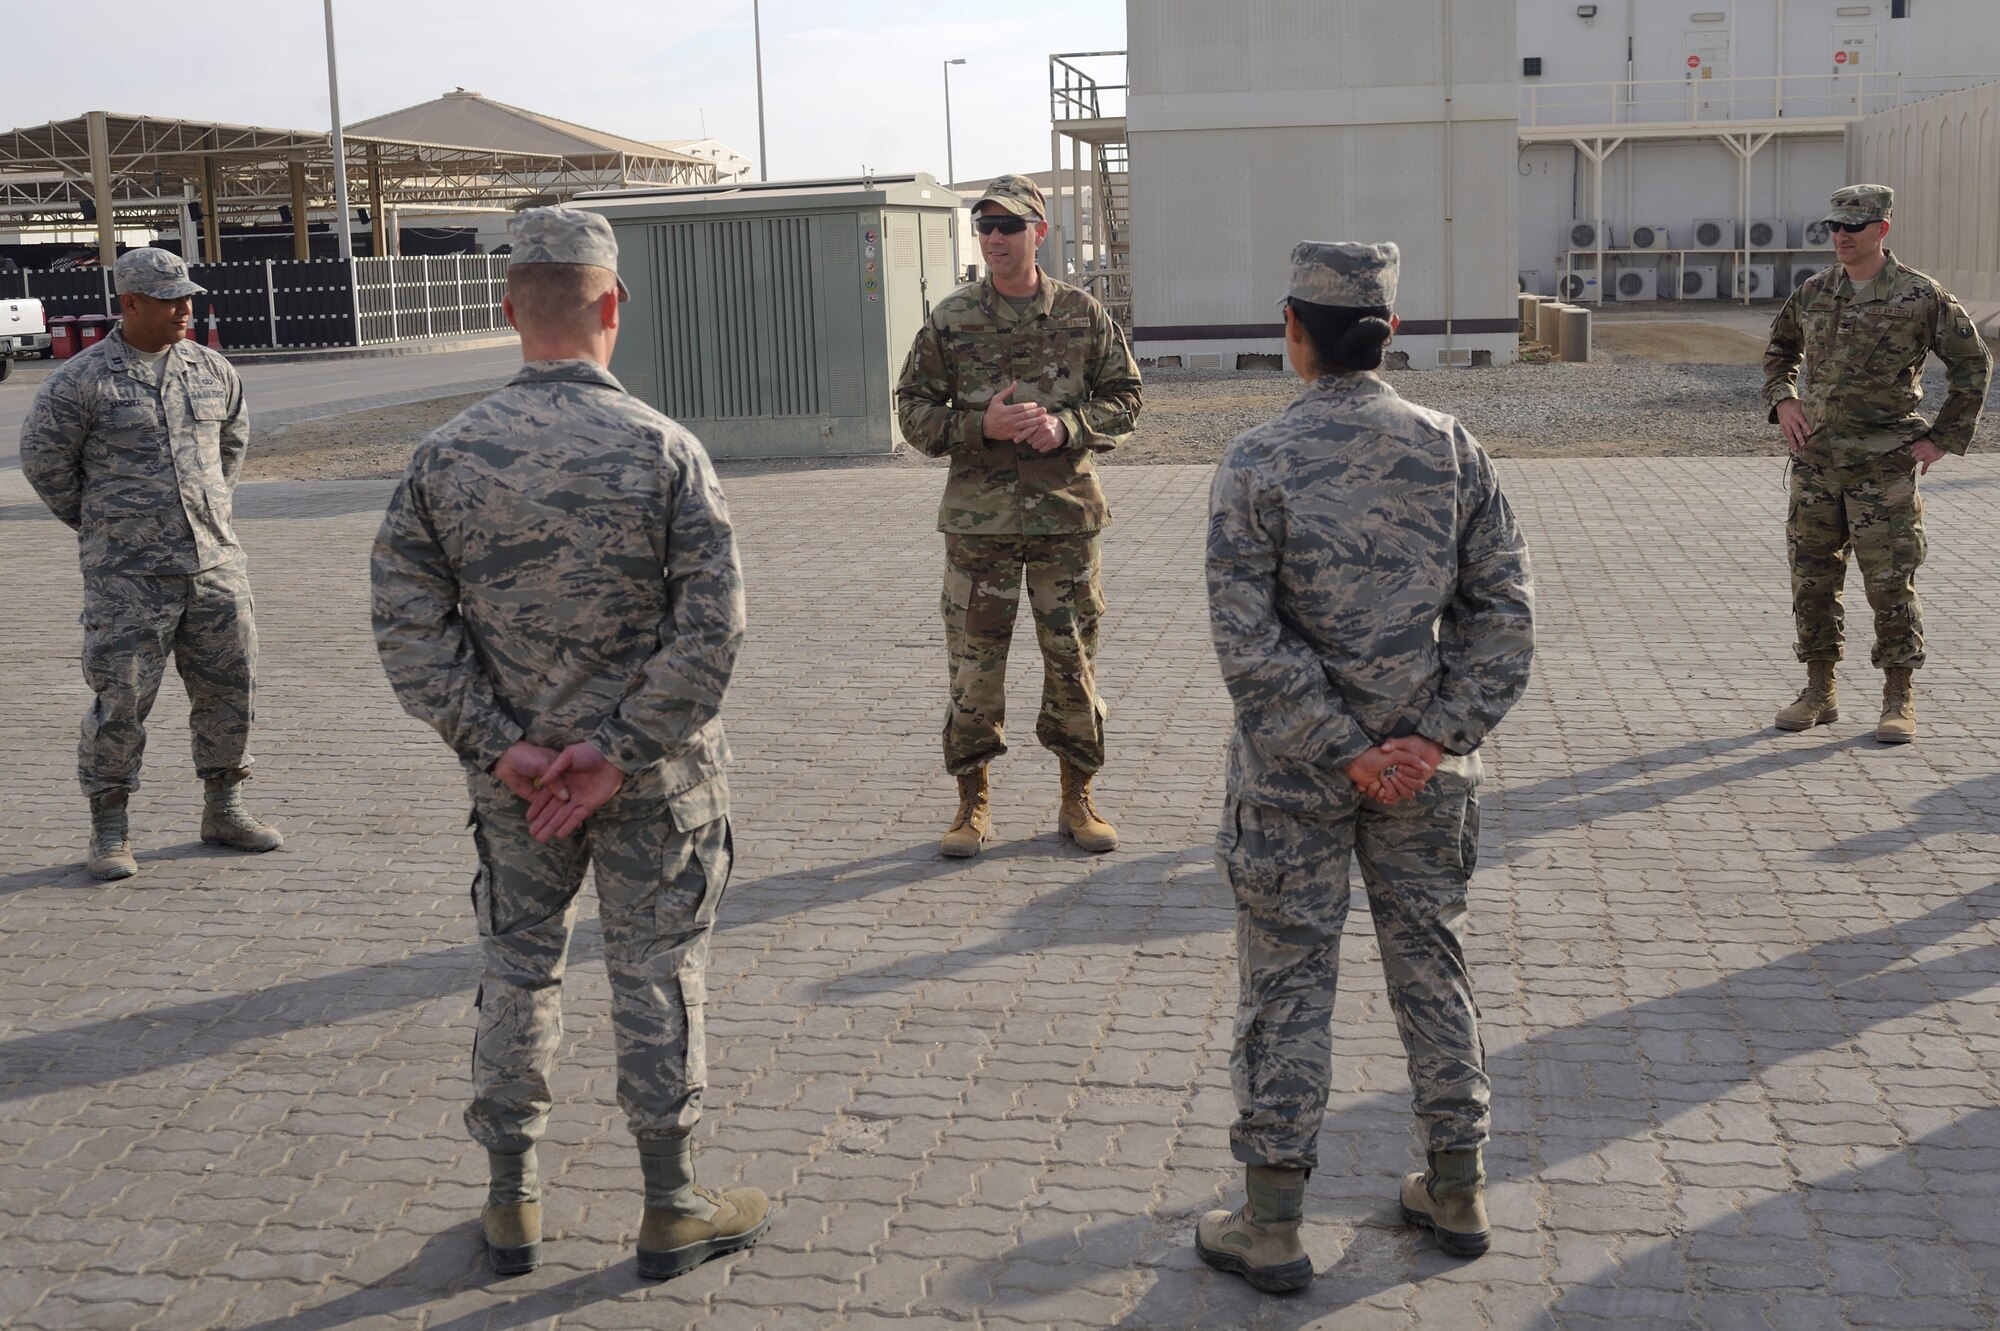 U.S. Air Force Col. Eric Rivera, U.S. Air Forces Central Command air reserve component advisor, coins two Airmen outside the 380th Air Expeditionary Wing headquarters building Al Dhafra Air Base, United Arab Emirates, Feb. 7, 2018. The origin of coining Airmen dates back to World War I, however nowadays they are used as mementos to recognize the outstanding performance and hard work of service members. (U.S. Air Force photo by Airman 1st Class D. Blake Browning)